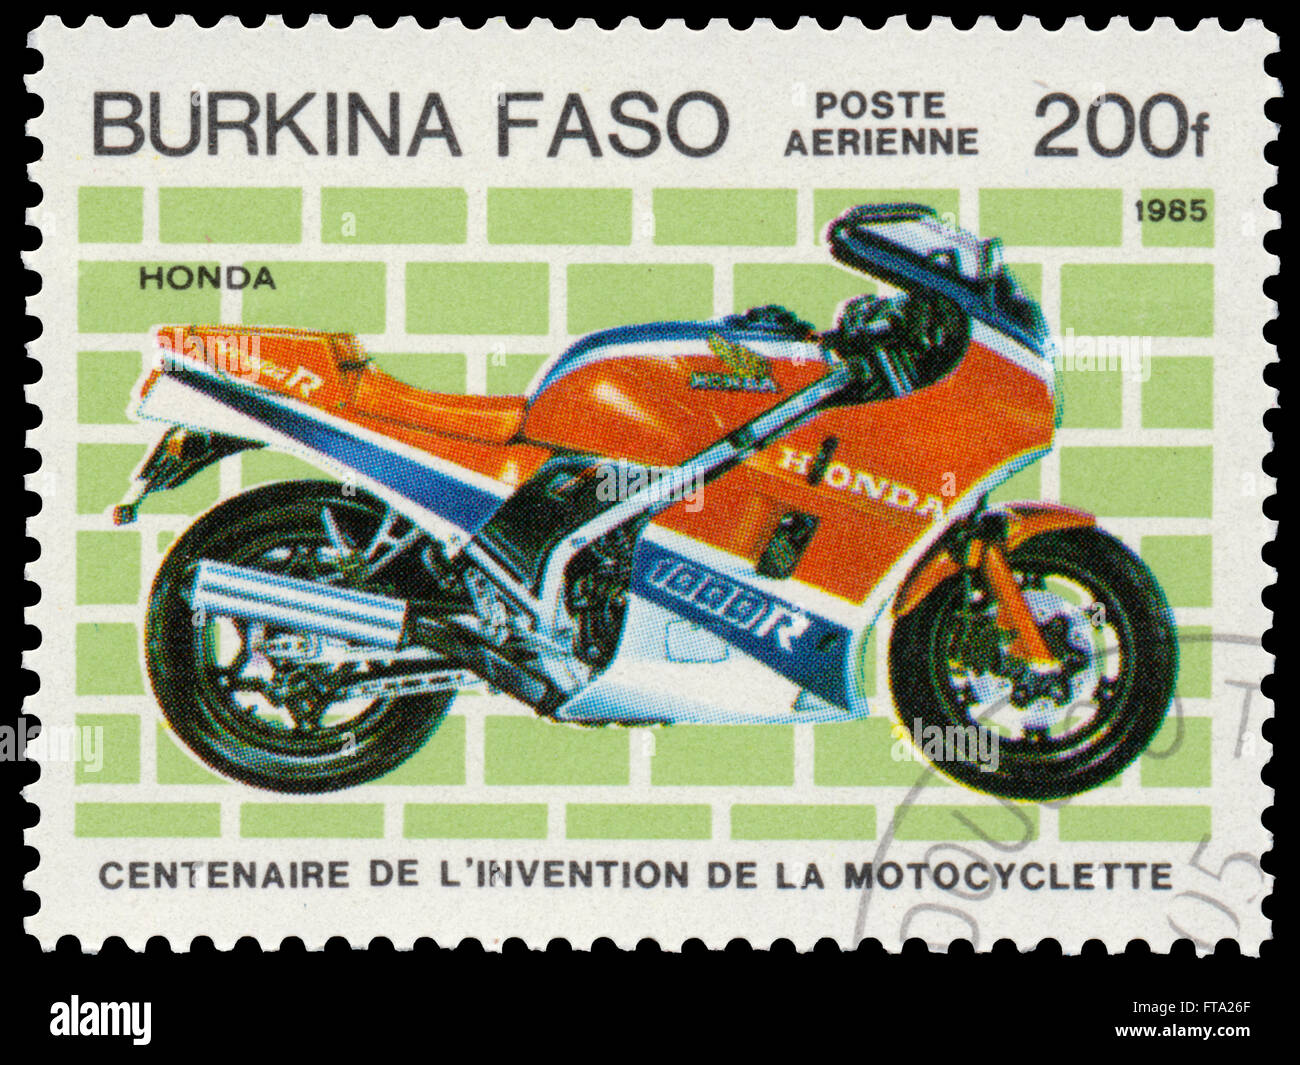 BUDAPEST, HUNGARY - 18 march 2016:  a stamp printed in Burkina Faso shows image of a vintage motorcycle, Honda, circa 1985 Stock Photo